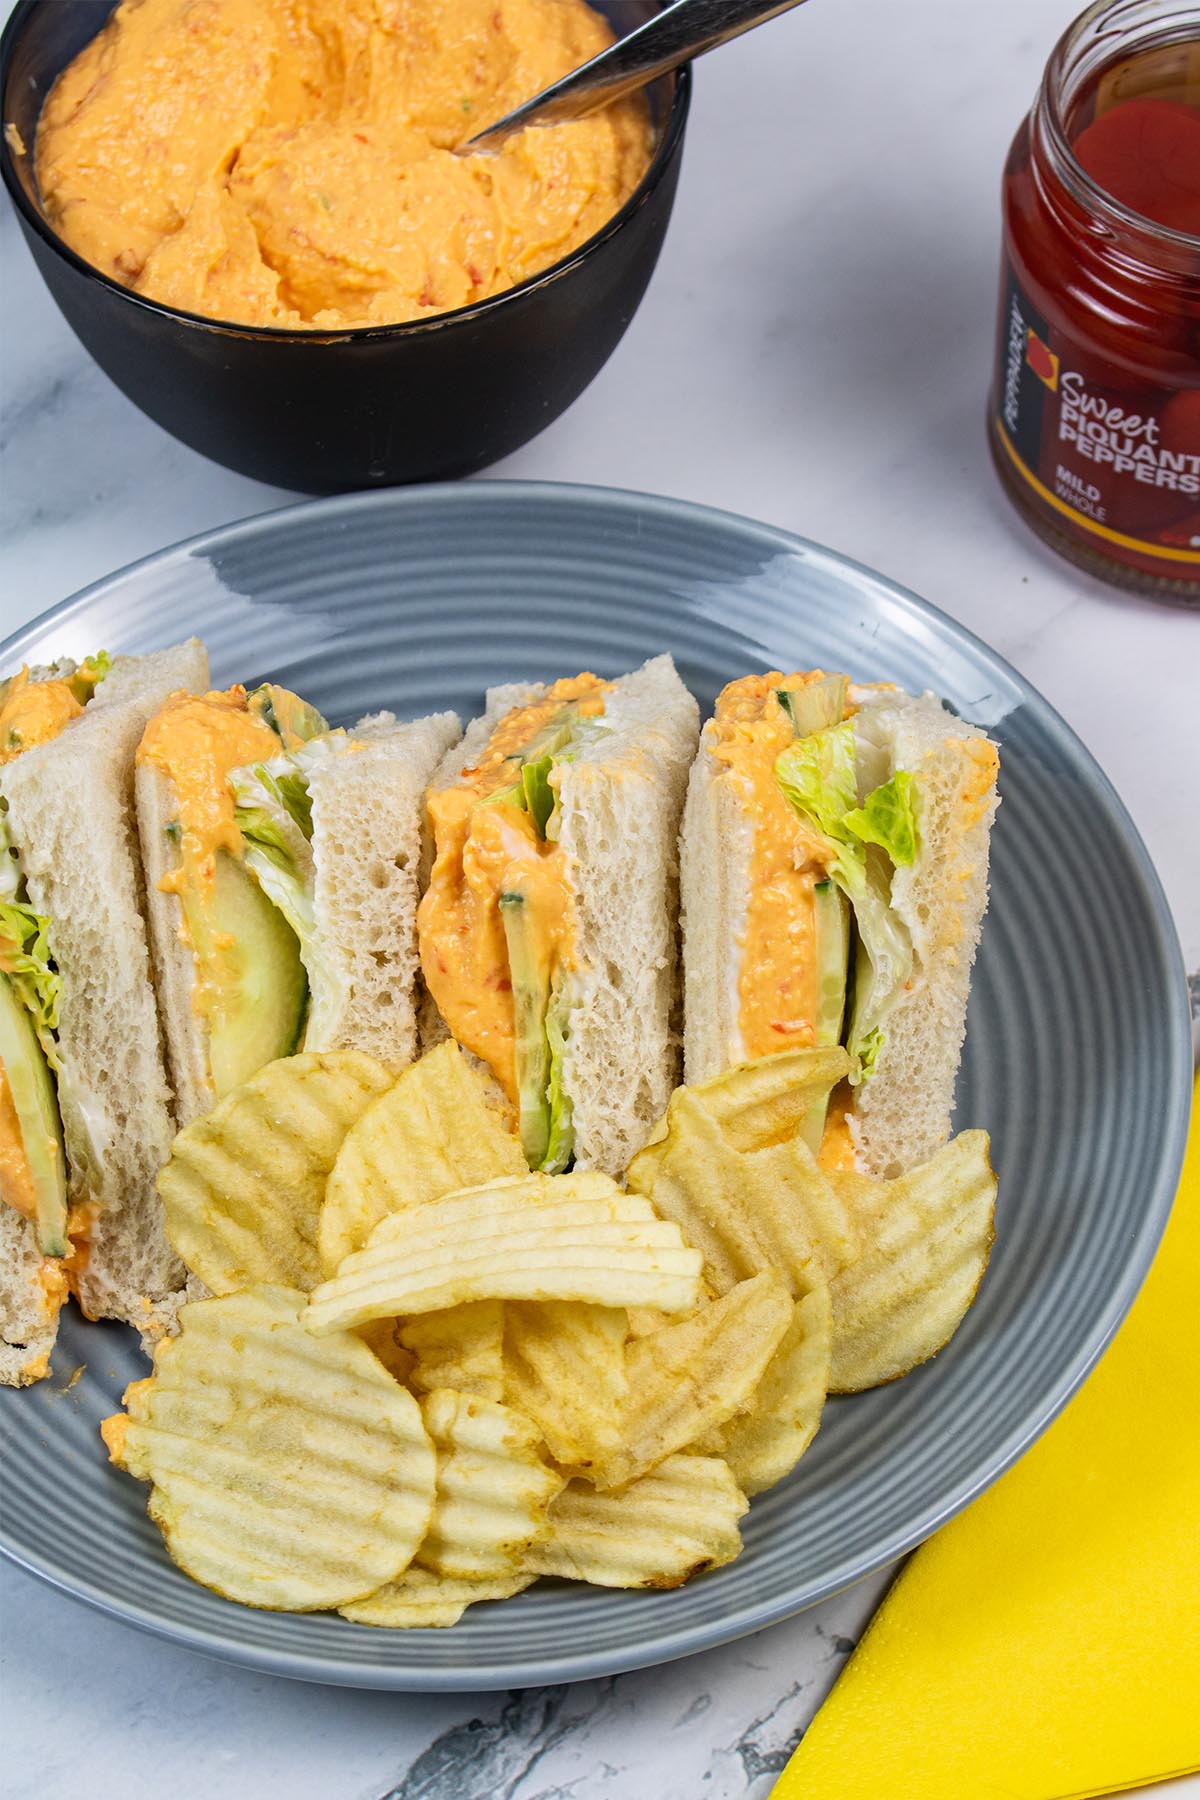 Pimento cheese sandwiches on a grey plate with crinkle crisps. Small bowl of extra sandwich filler, jar of piquante peppers and yellow napkin in background